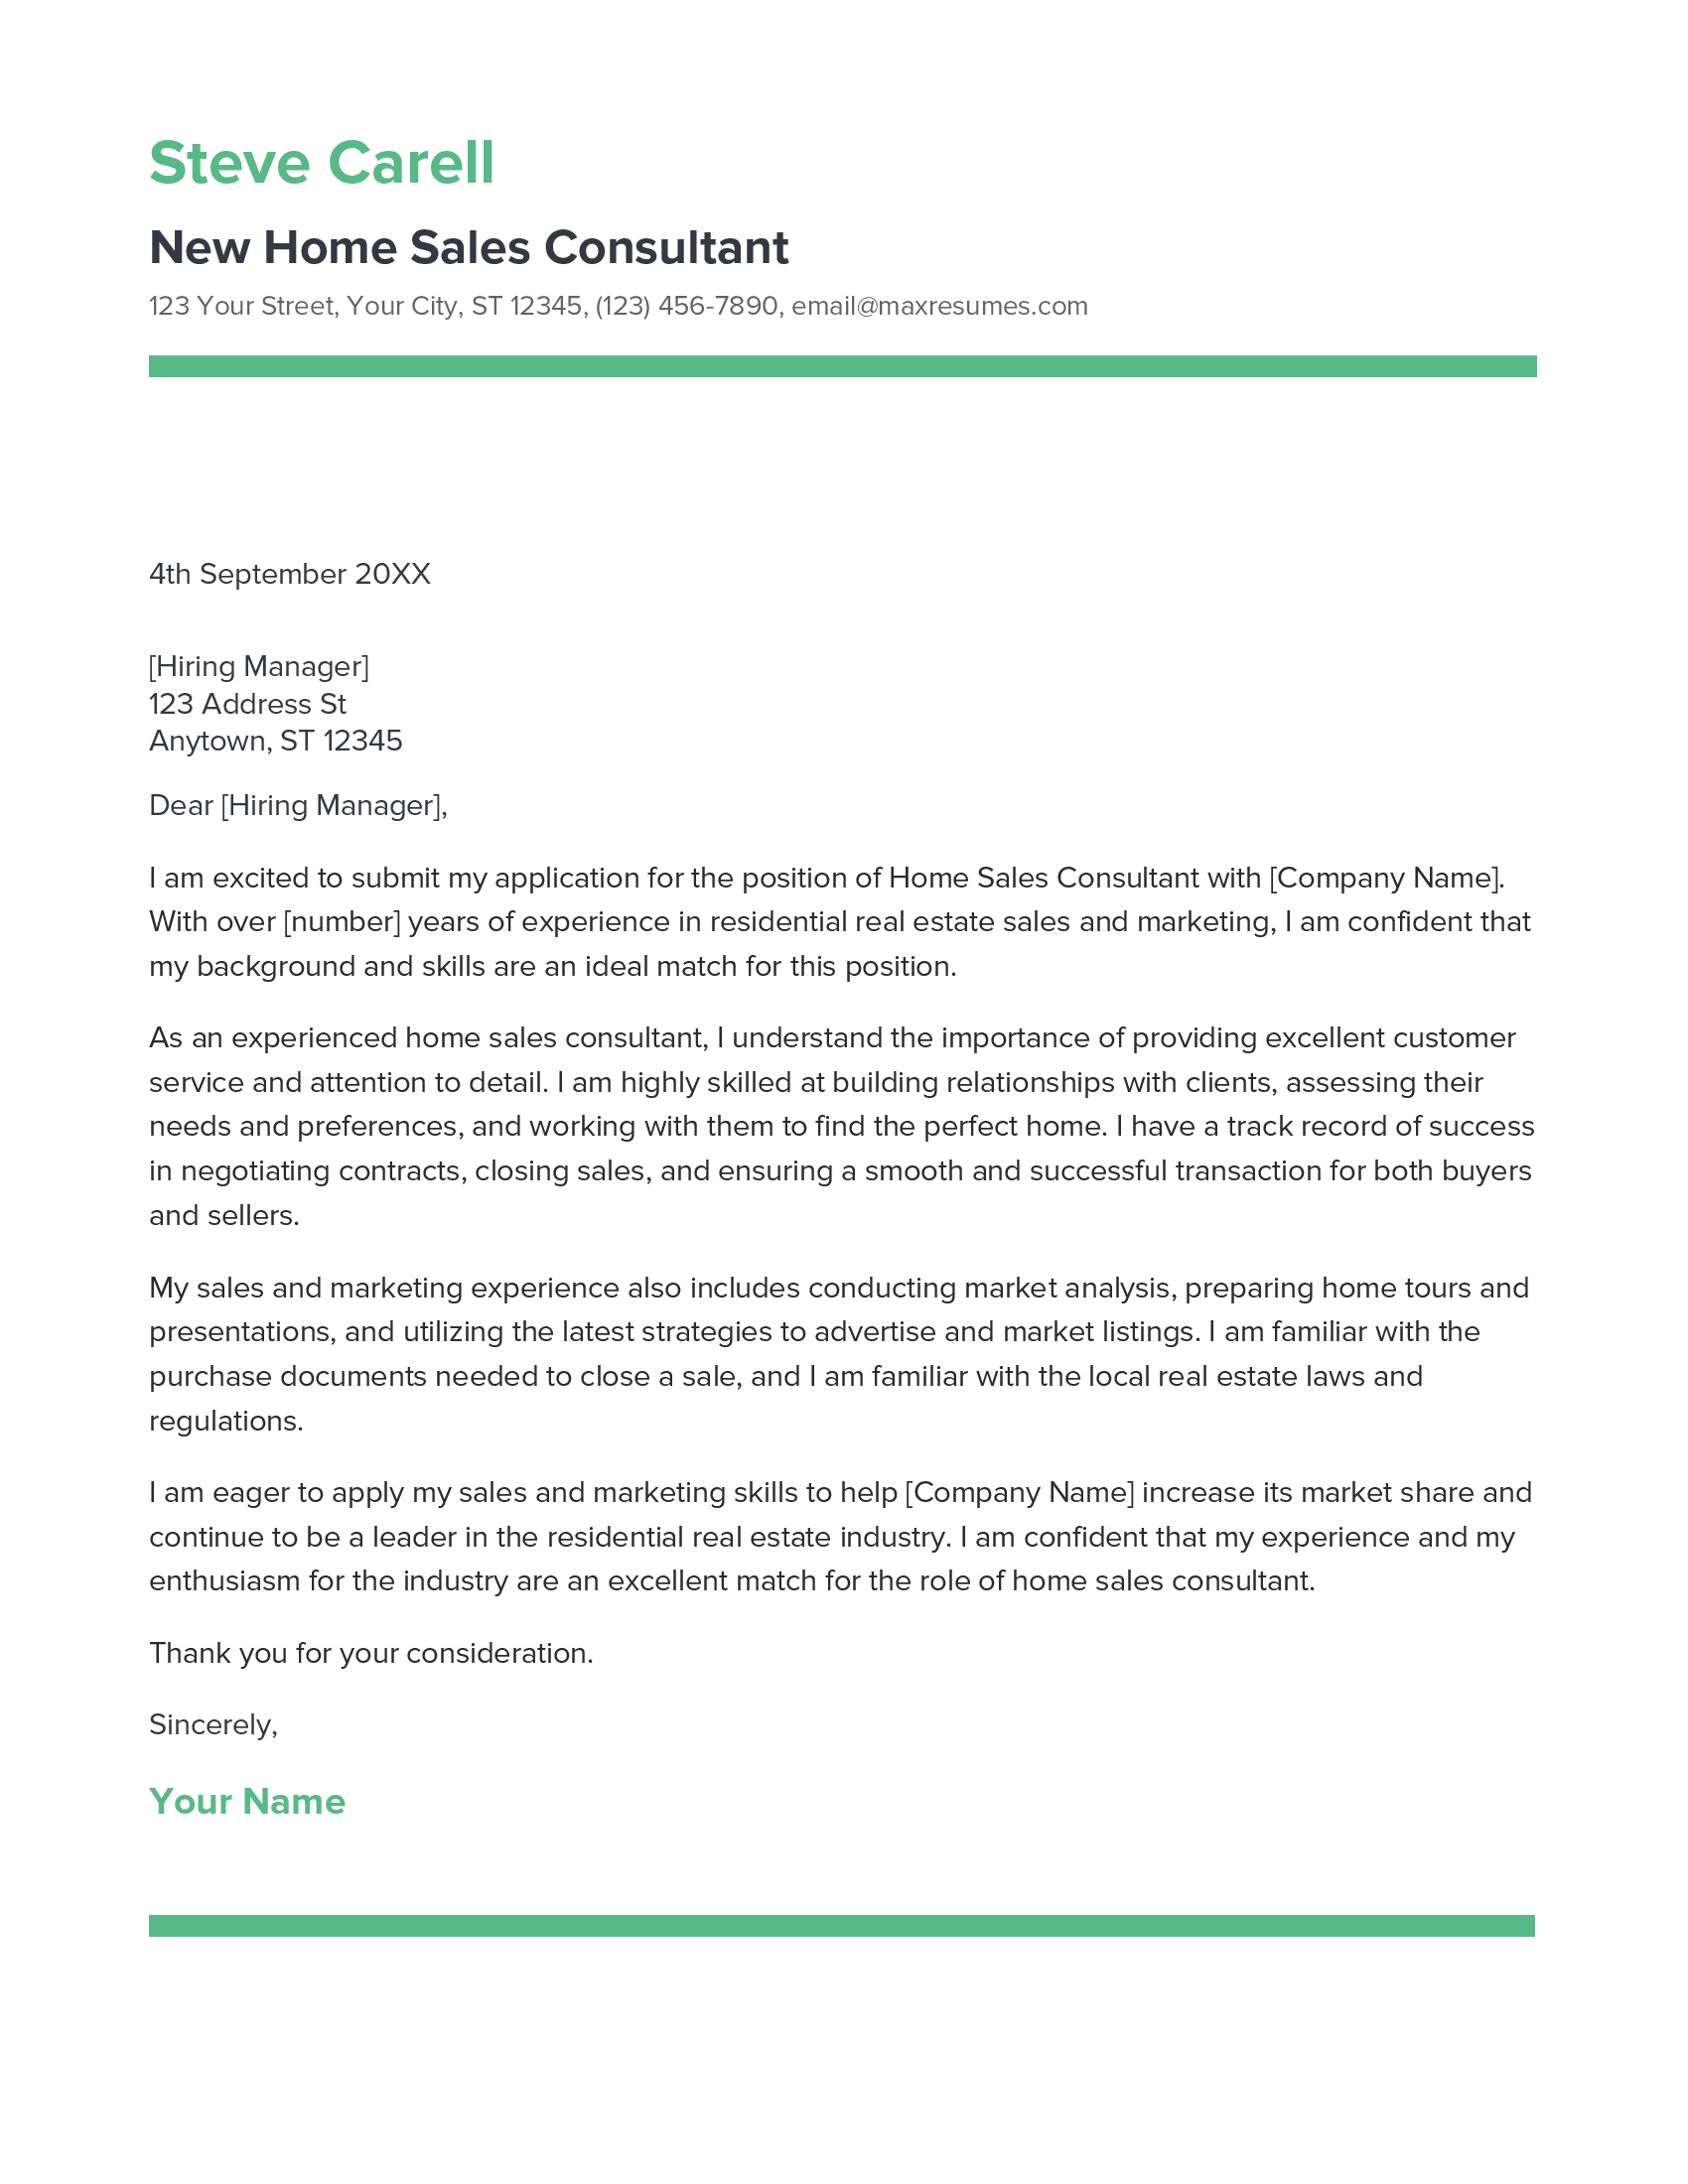 New Home Sales Consultant Cover Letter Example